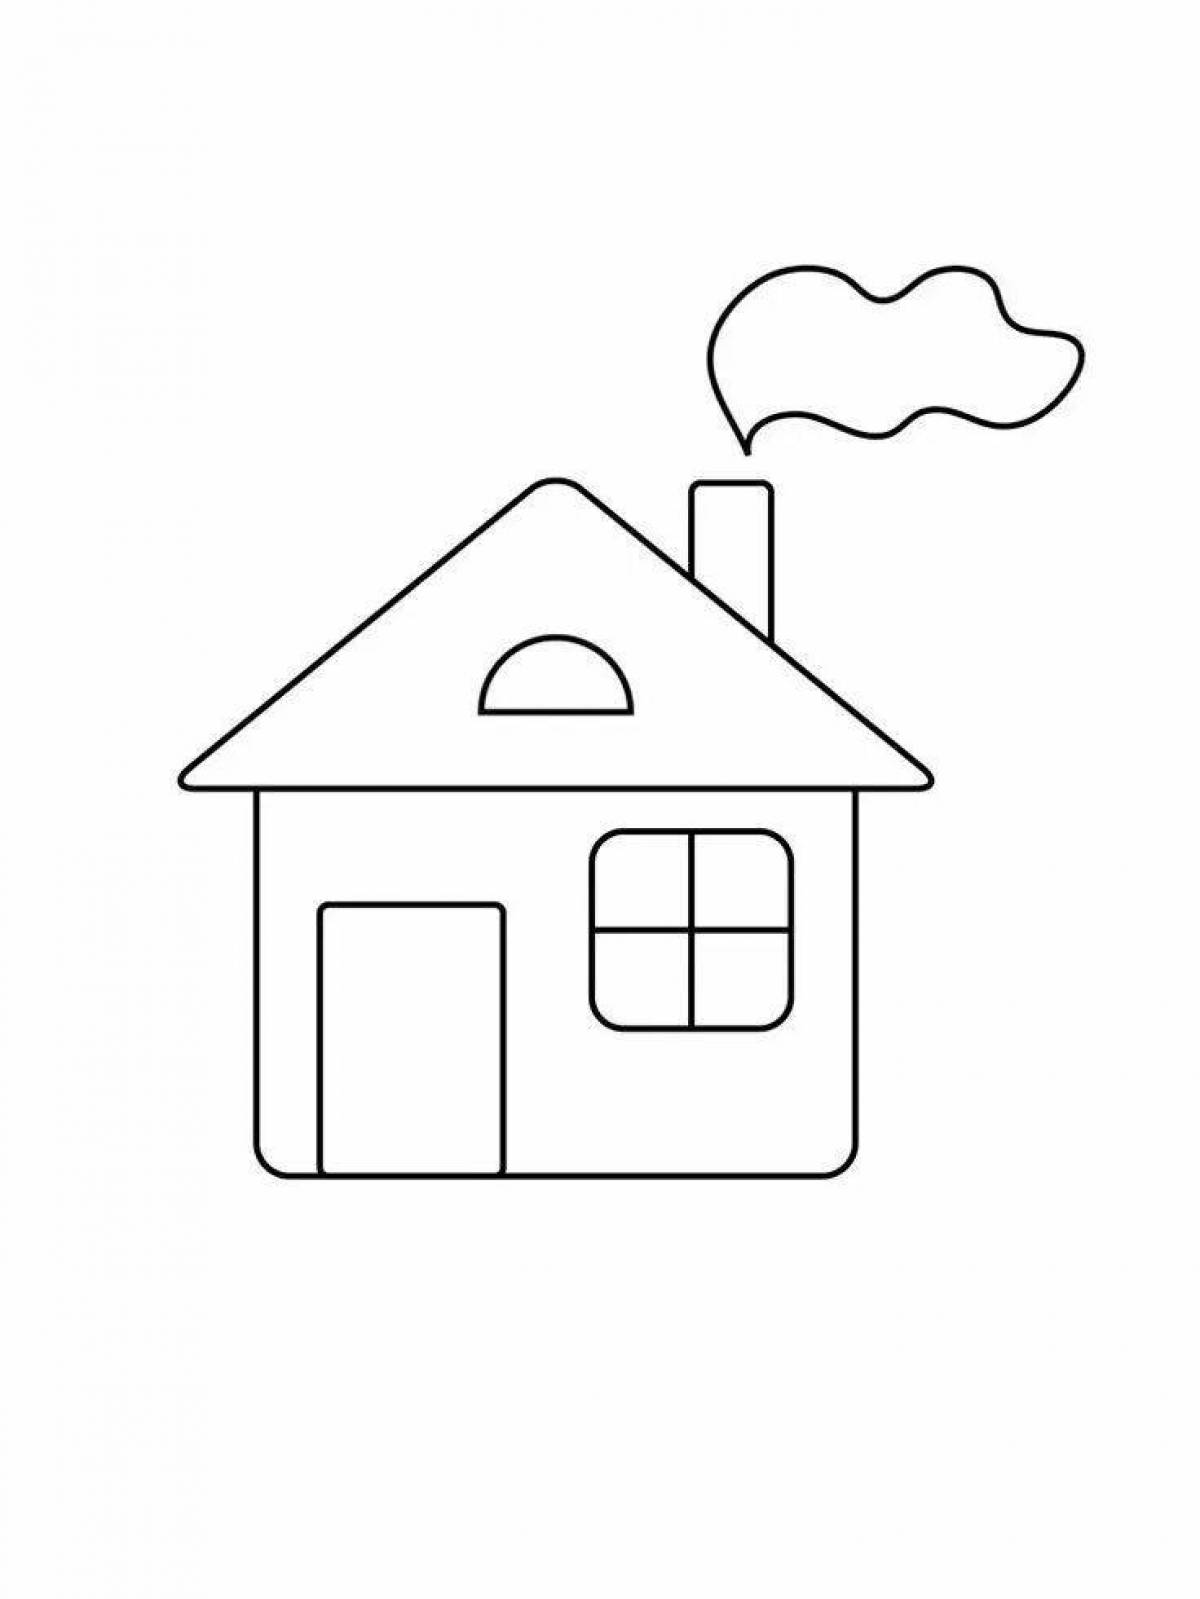 Adorable house coloring page for children 2-3 years old